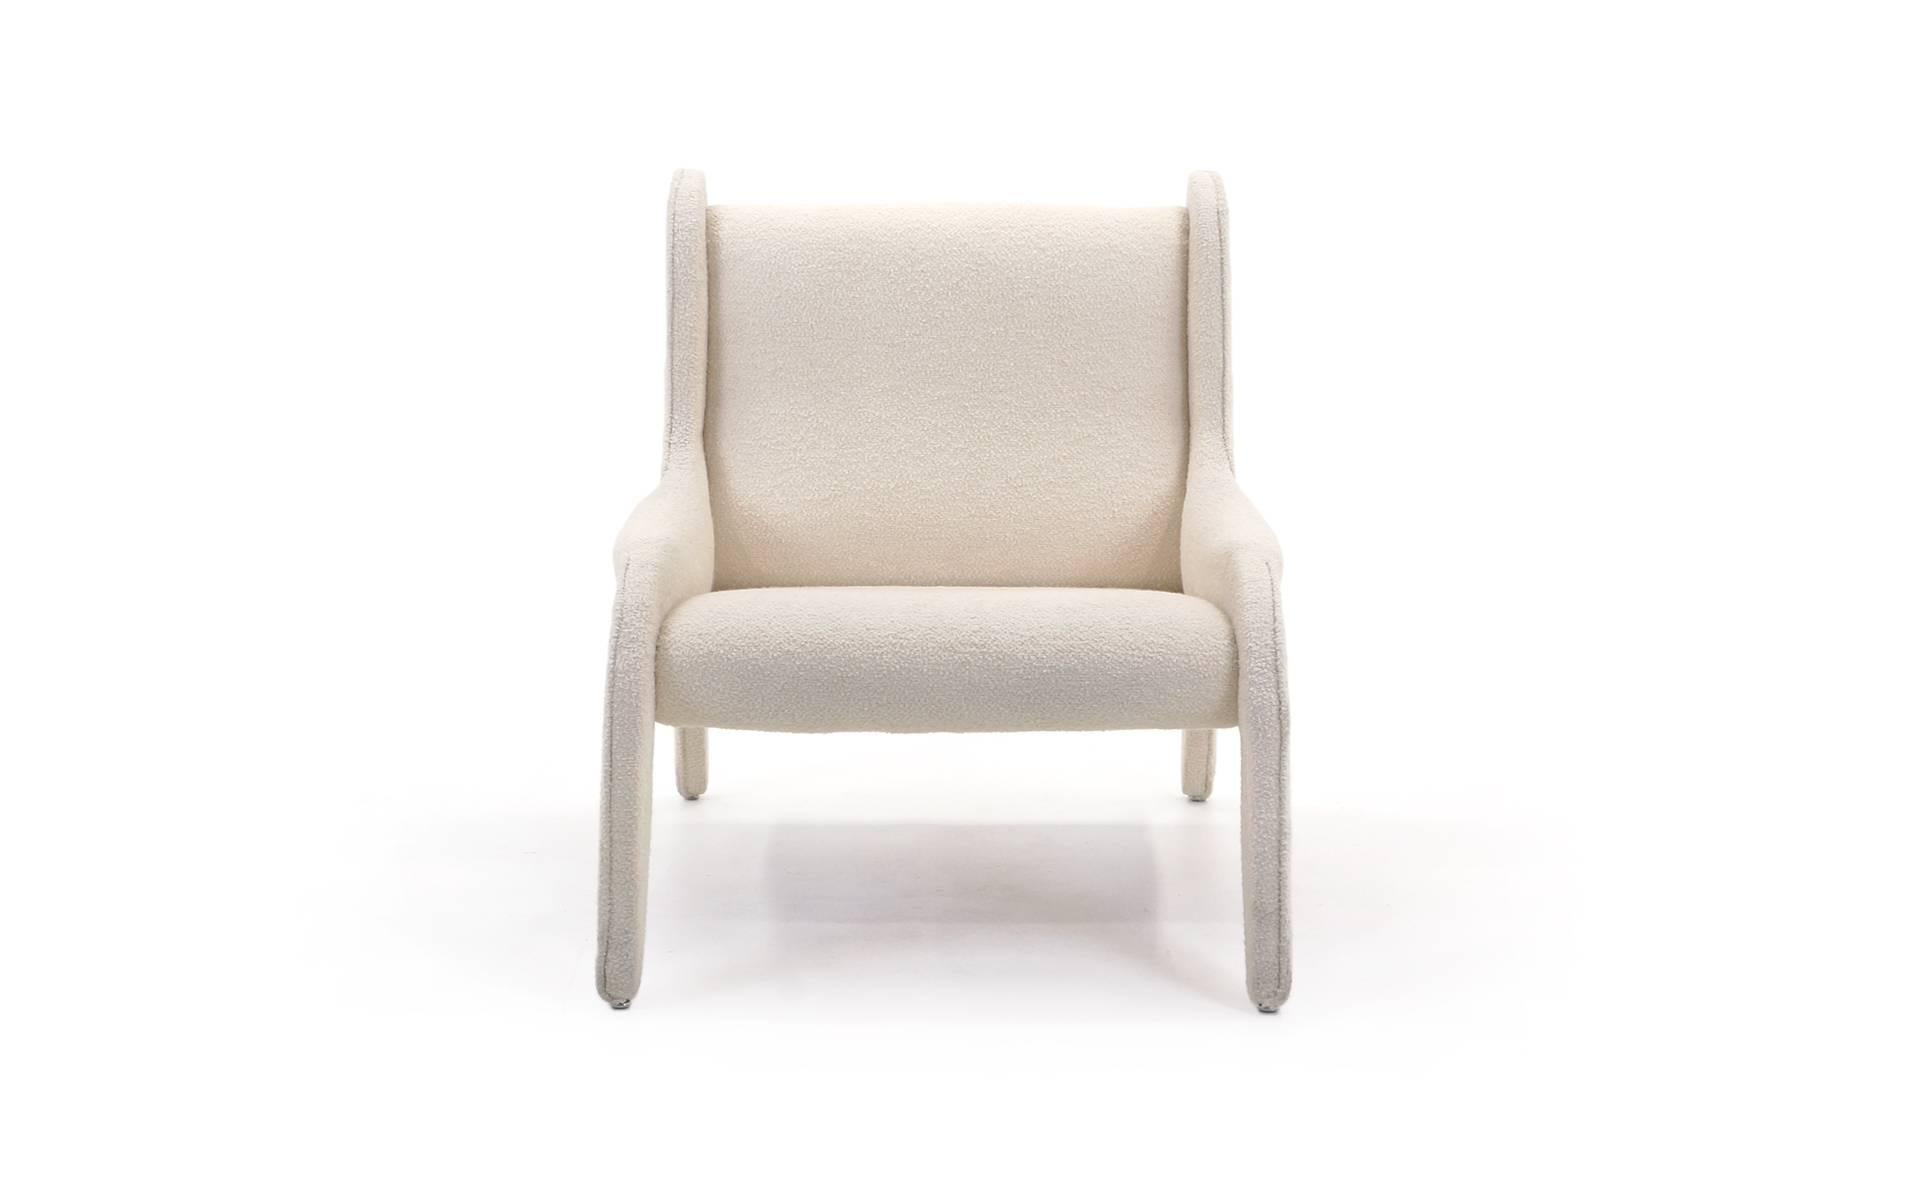 "Antropus Chair" designed by Marco Zanuso for Arflex in 1949. This chair has been expertly reupholstered and is in excellent condition.  Overall height is 34 inches on the sides.   Center back height is 32 inches.  Seat height is 16 inches